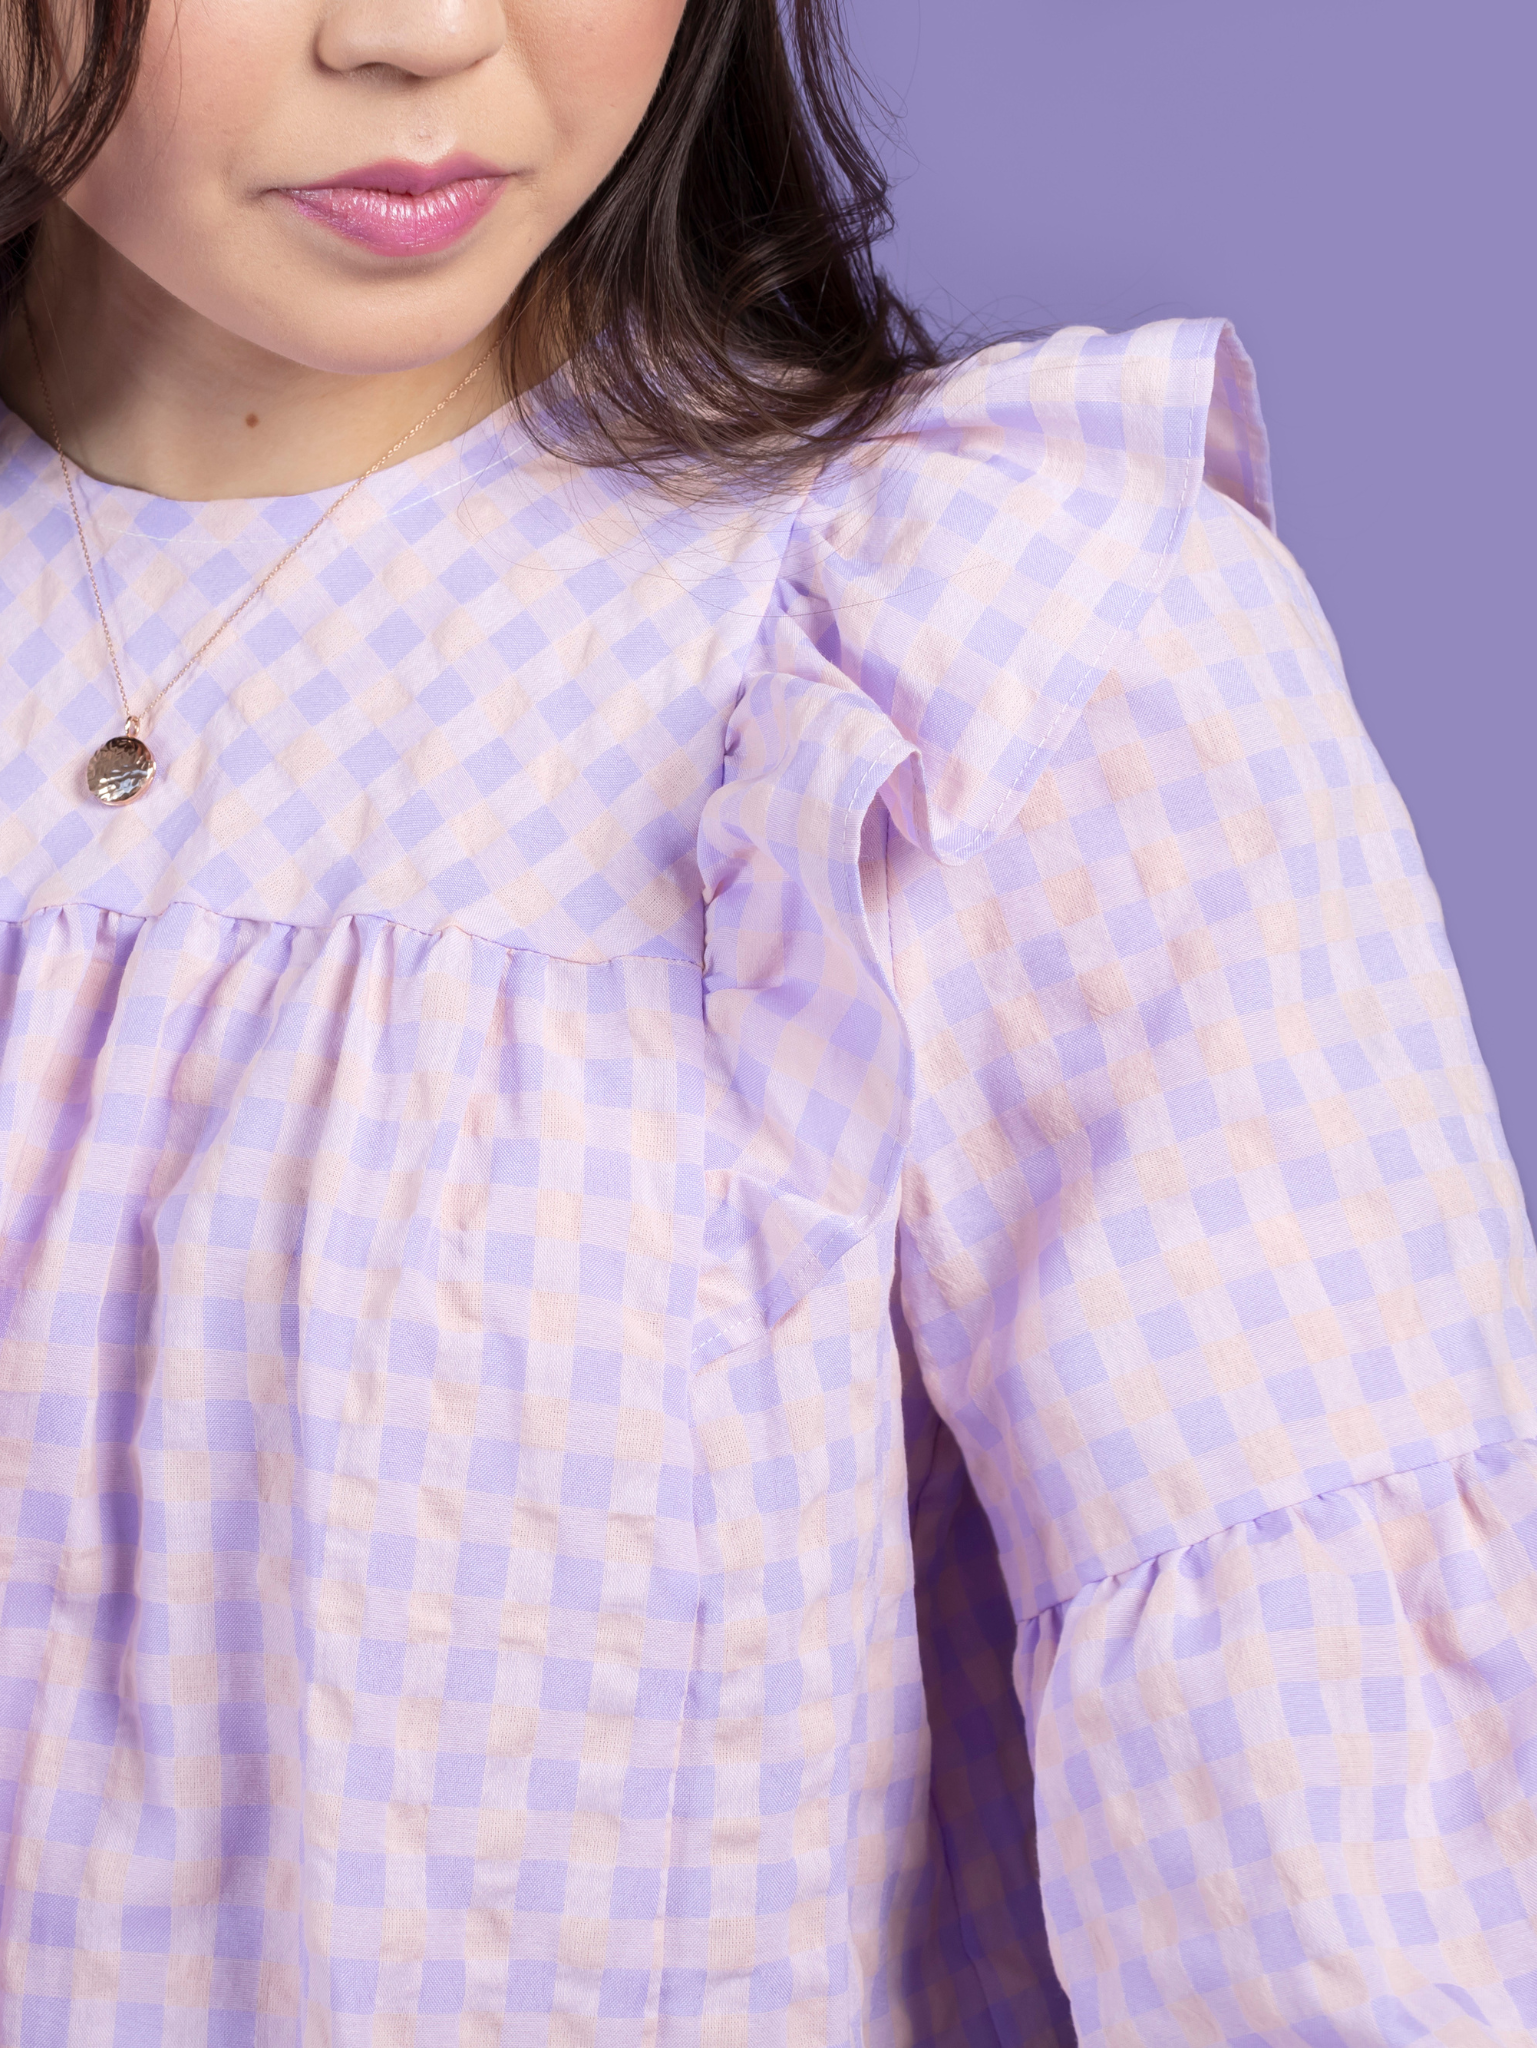 Sewing Kit - Marnie Blouse and Mini Dress in Morris Pink Cotton Lawn